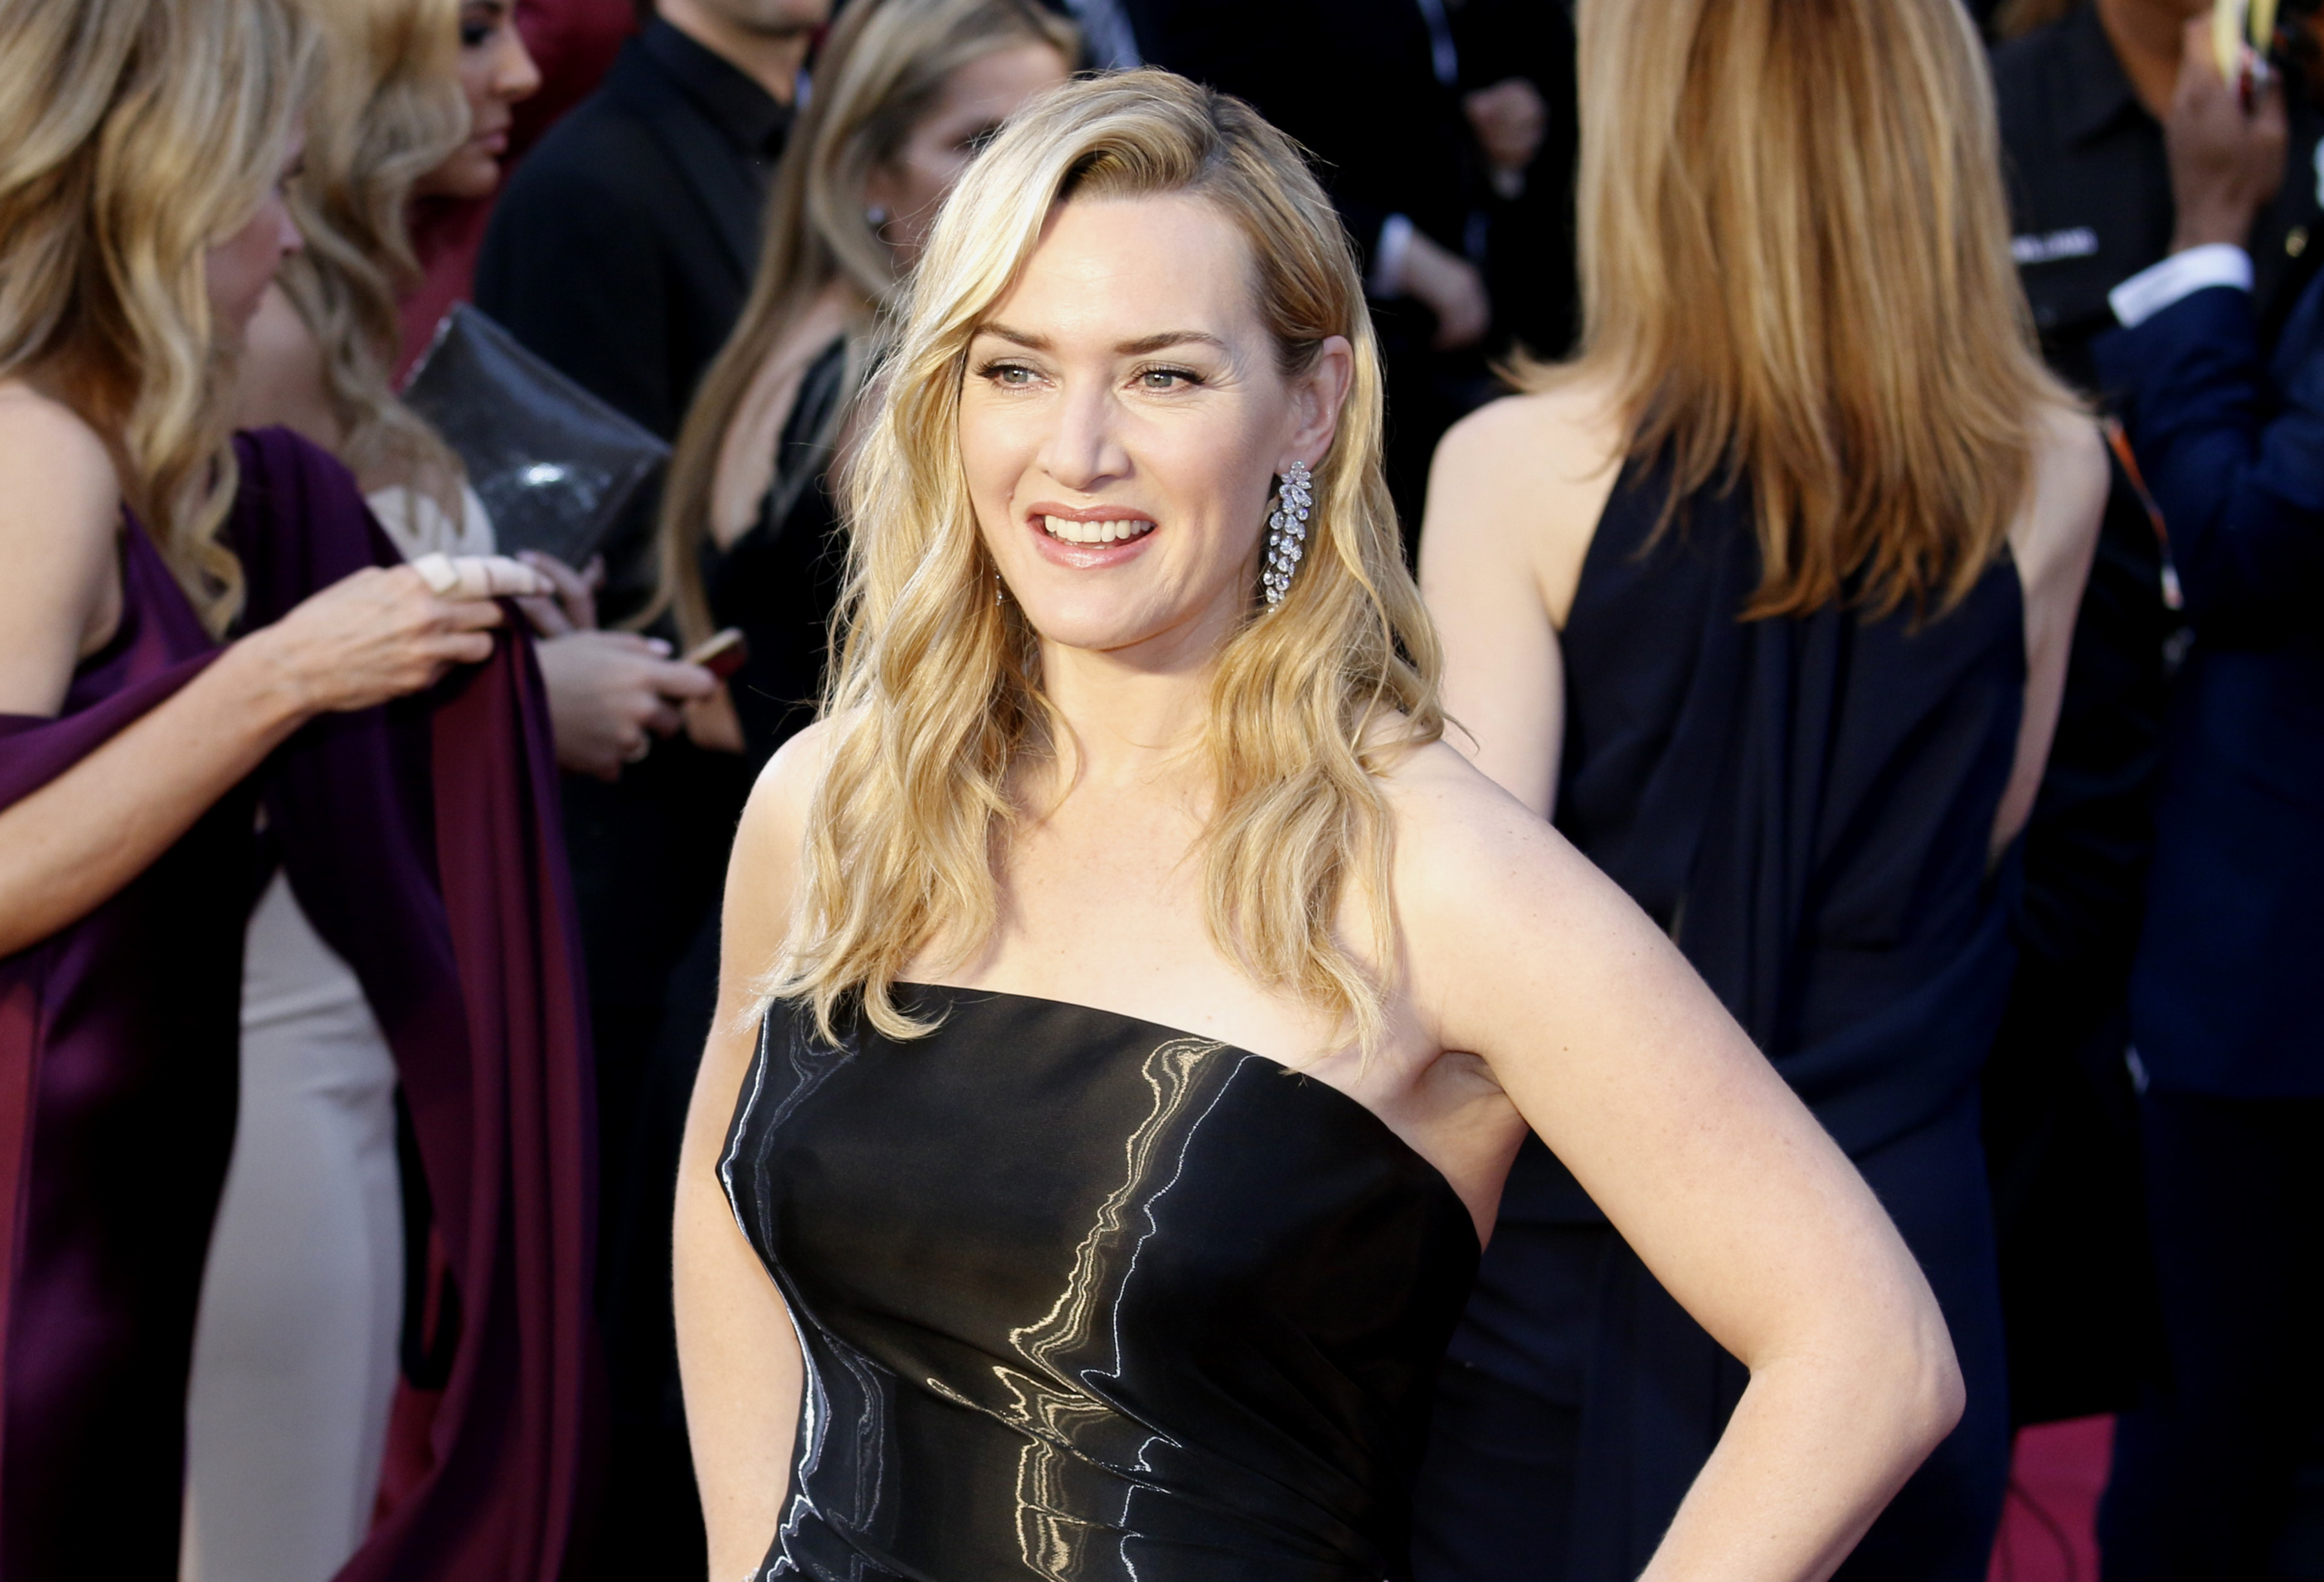 Kate Winslet at the 88th Annual Academy Awards held at the Hollywood & Highland Center in Hollywood, USA on February 28, 2016.